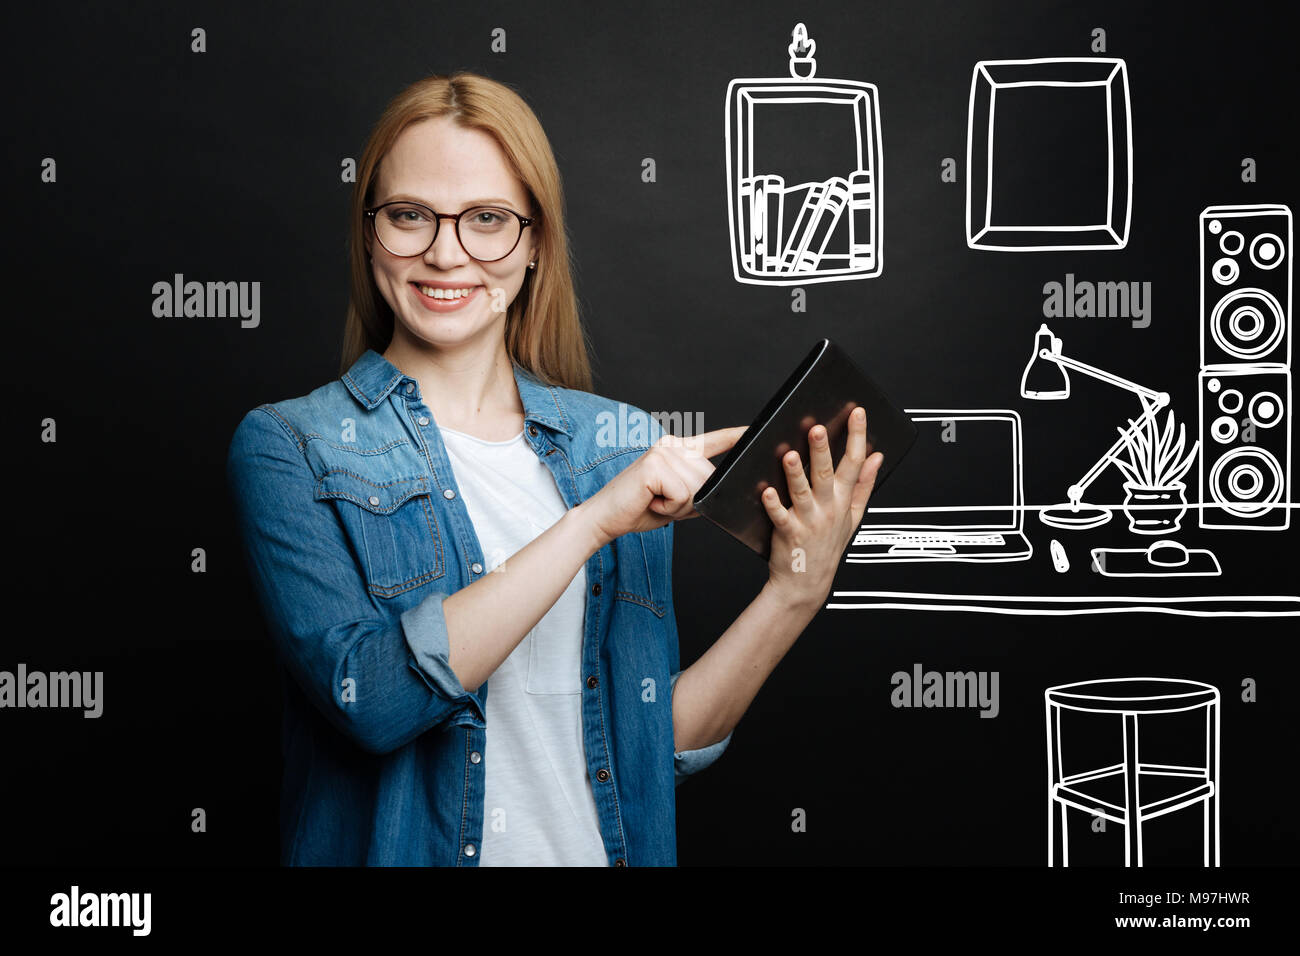 Clever student holding a modern tablet and feeling confident Stock Photo